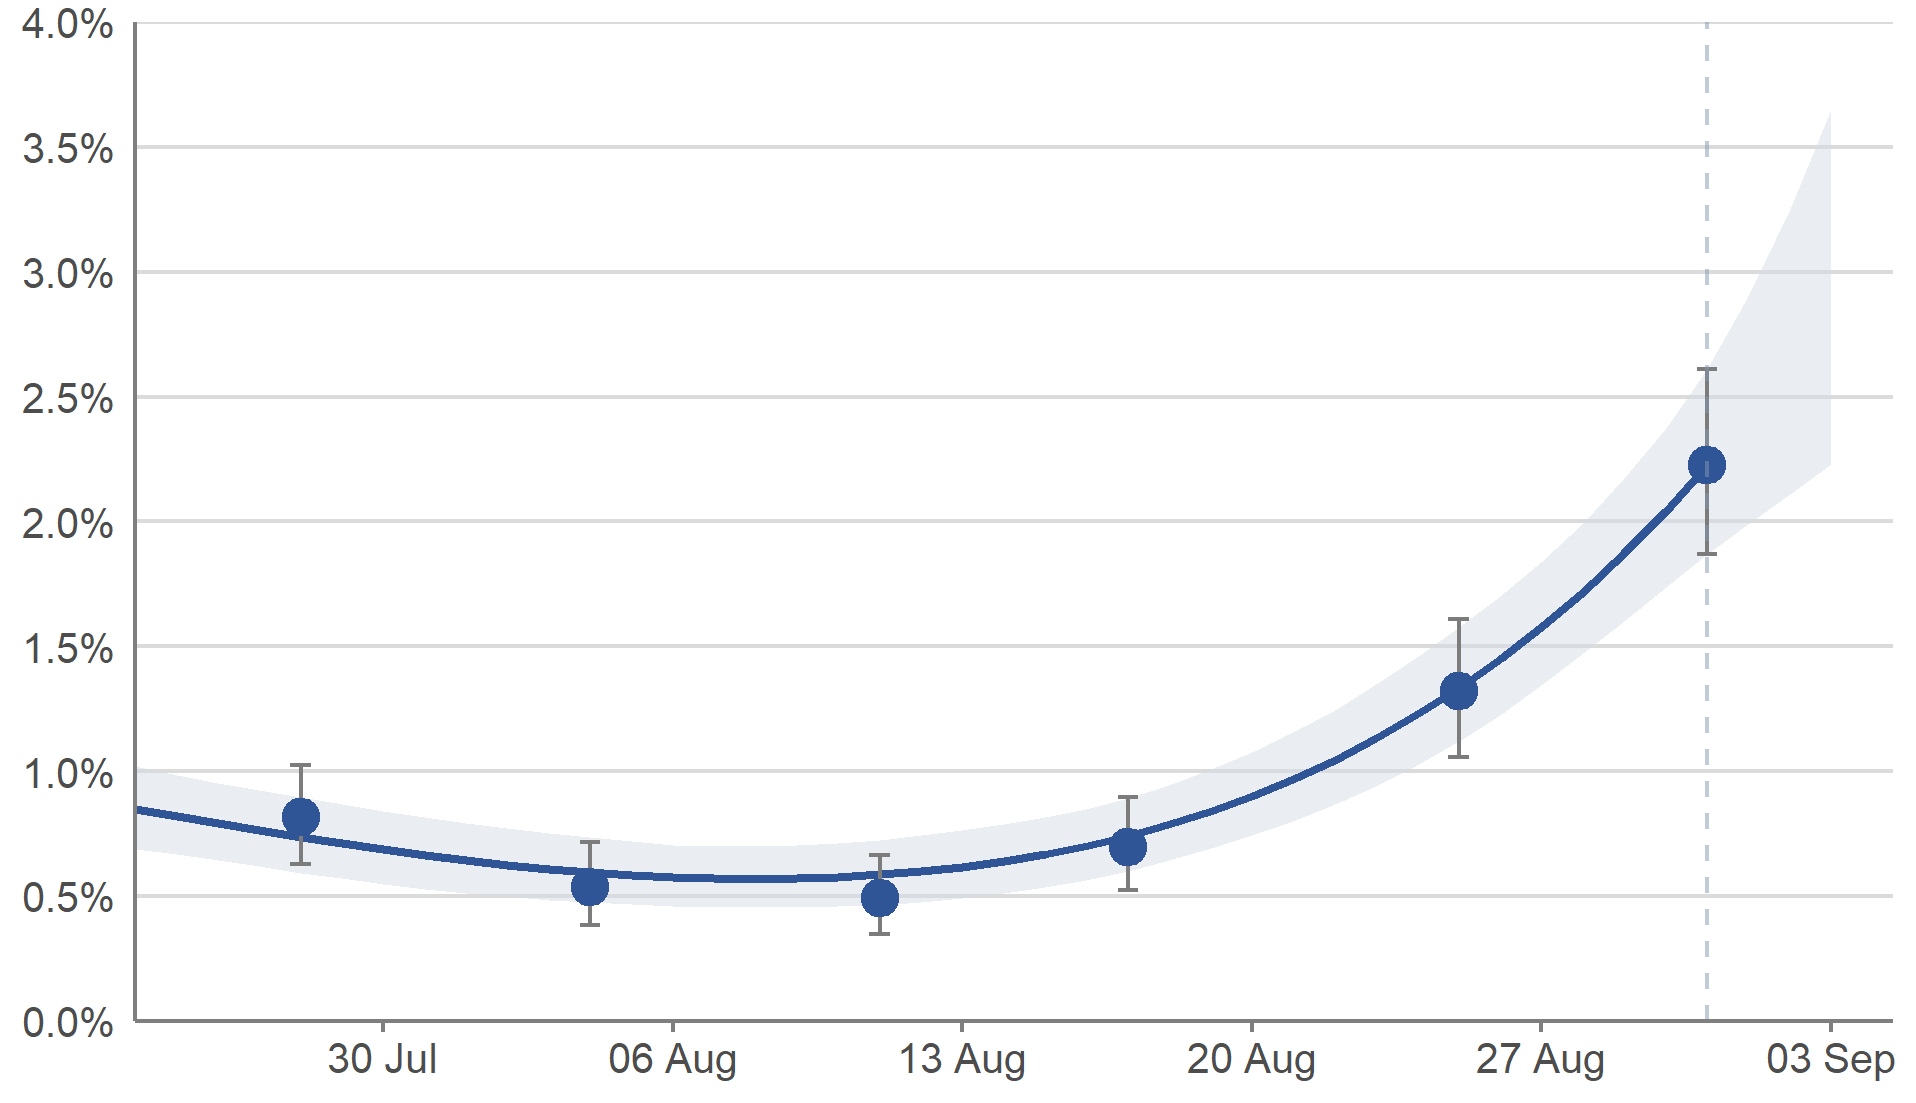 Figure 1: Modelled daily estimates and official reported estimates of the percentage of the community population in Scotland testing positive for COVID-19 between 24 July and 3 September 2021, including 95% credible intervals (see notes 2,3,4,5,6)